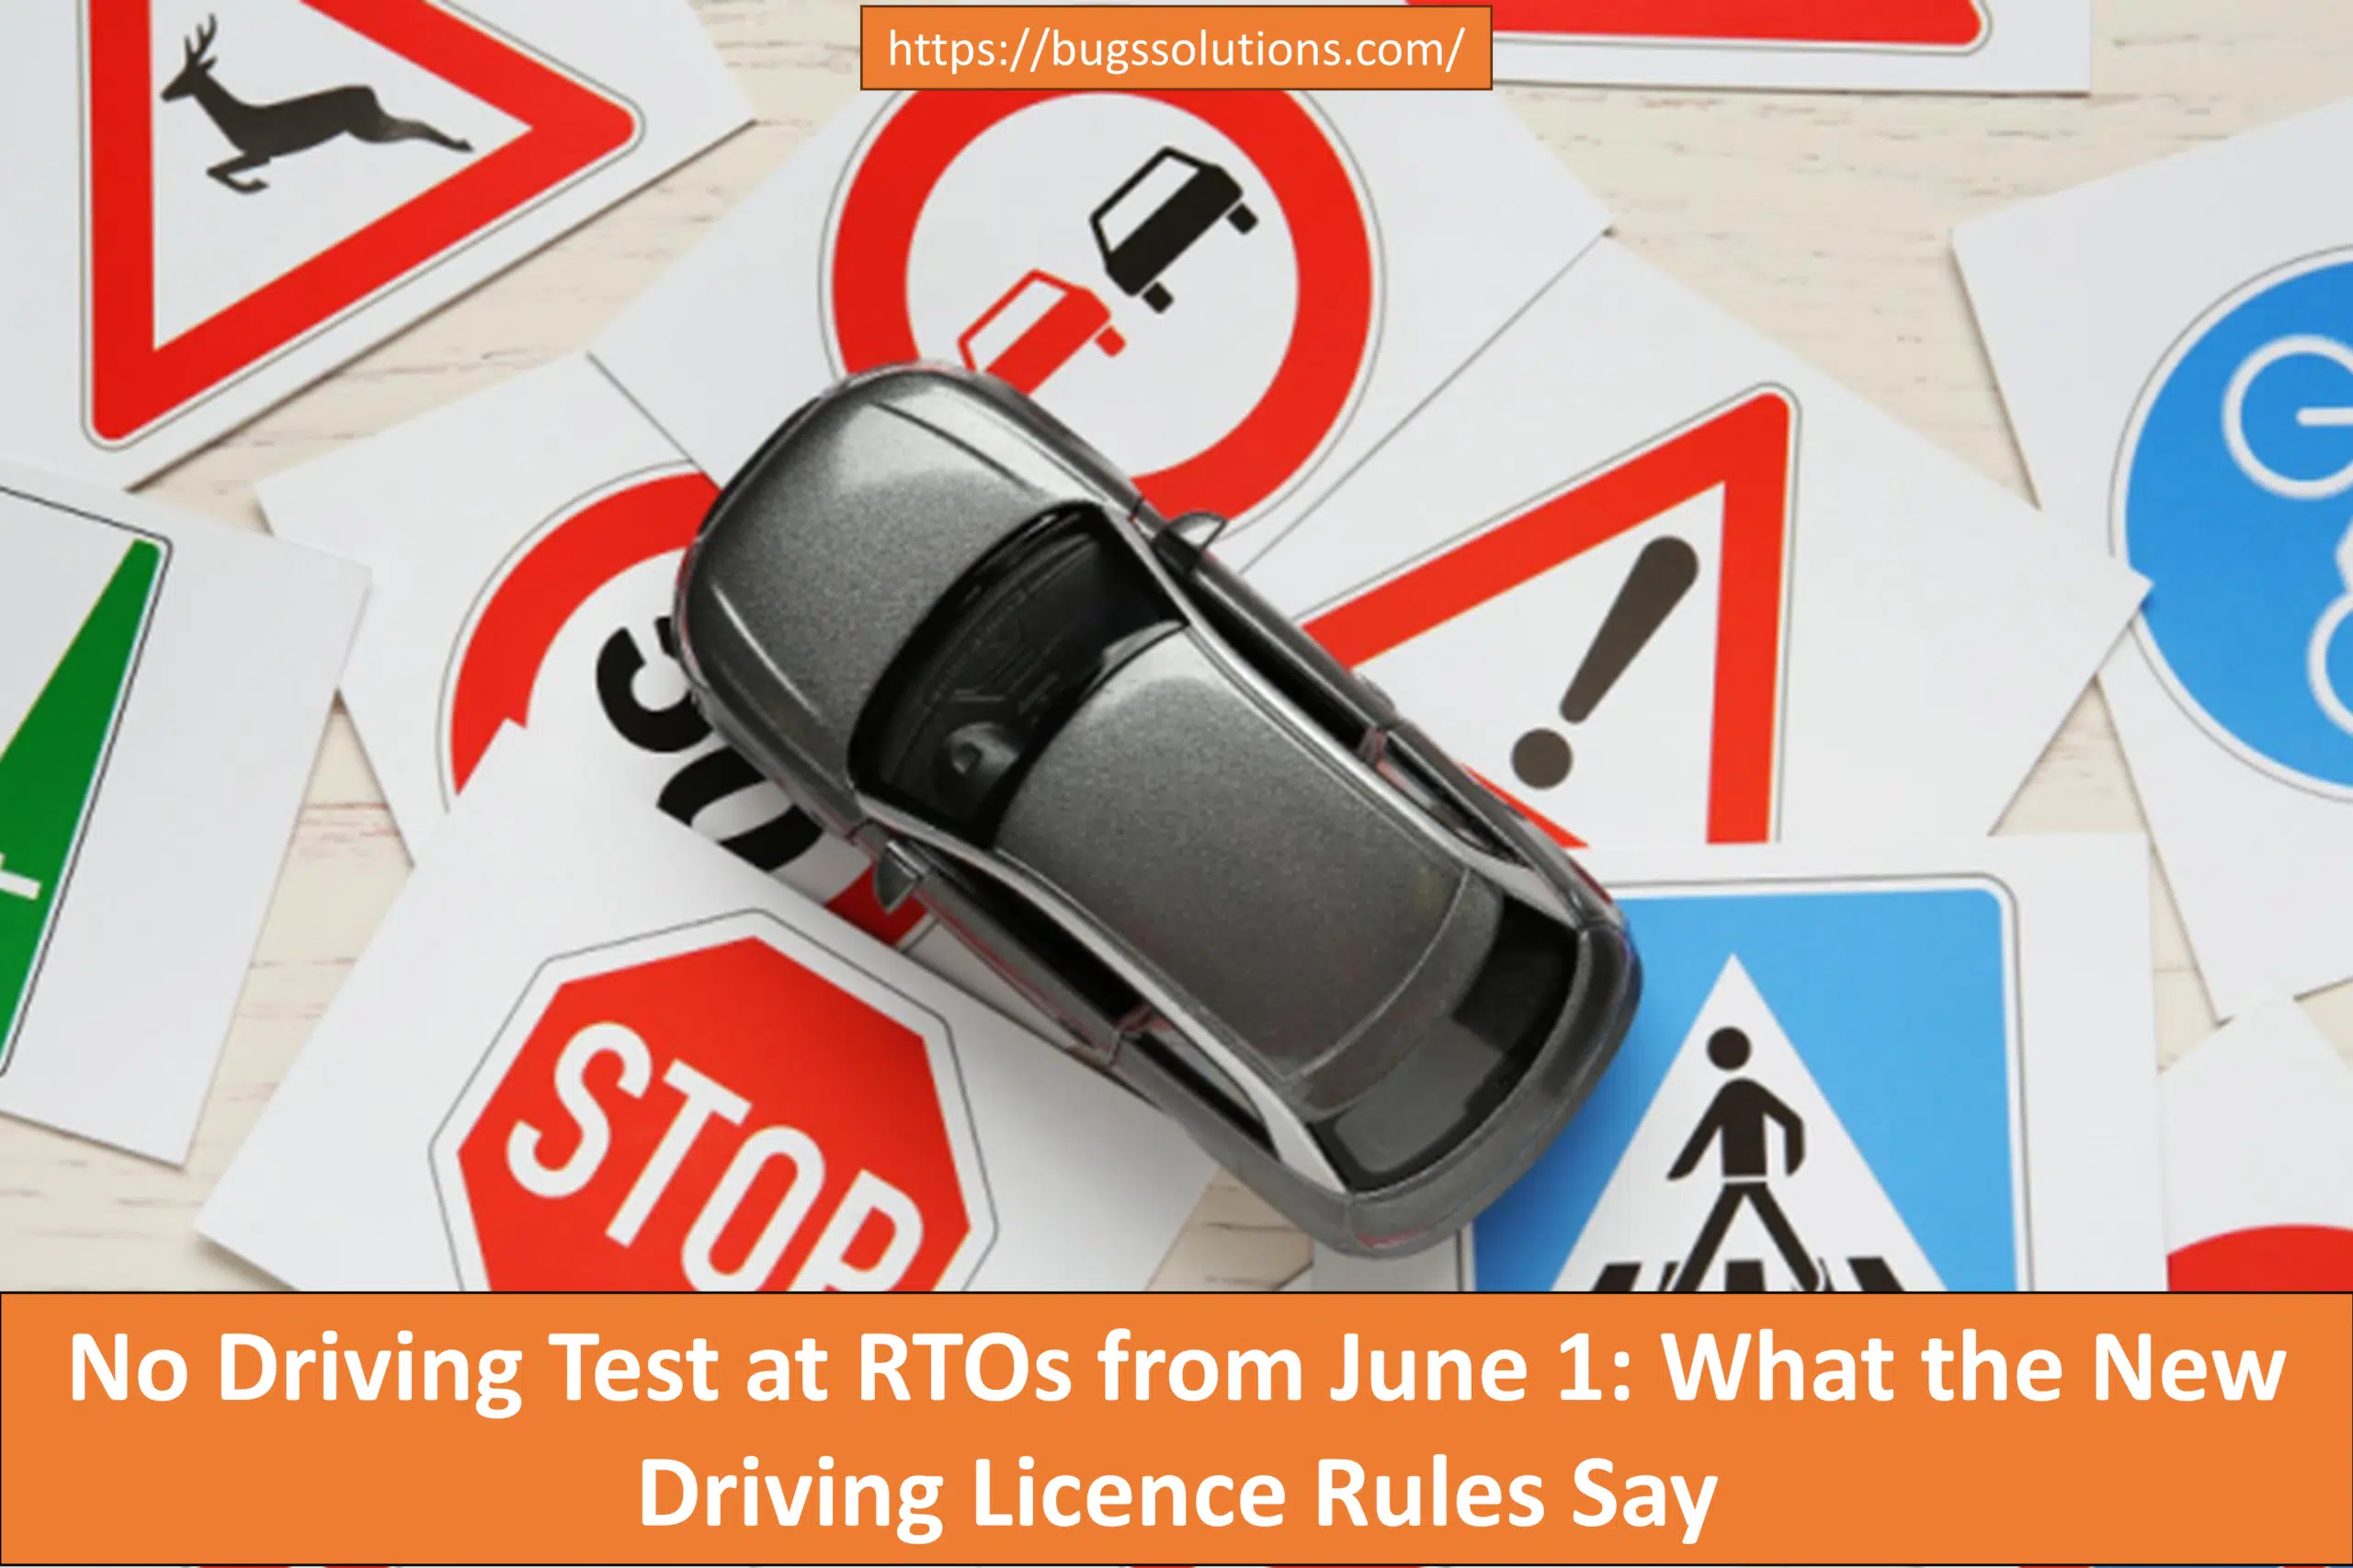 No Driving Test at RTOs from June 1 What the New Driving Licence Rules Say